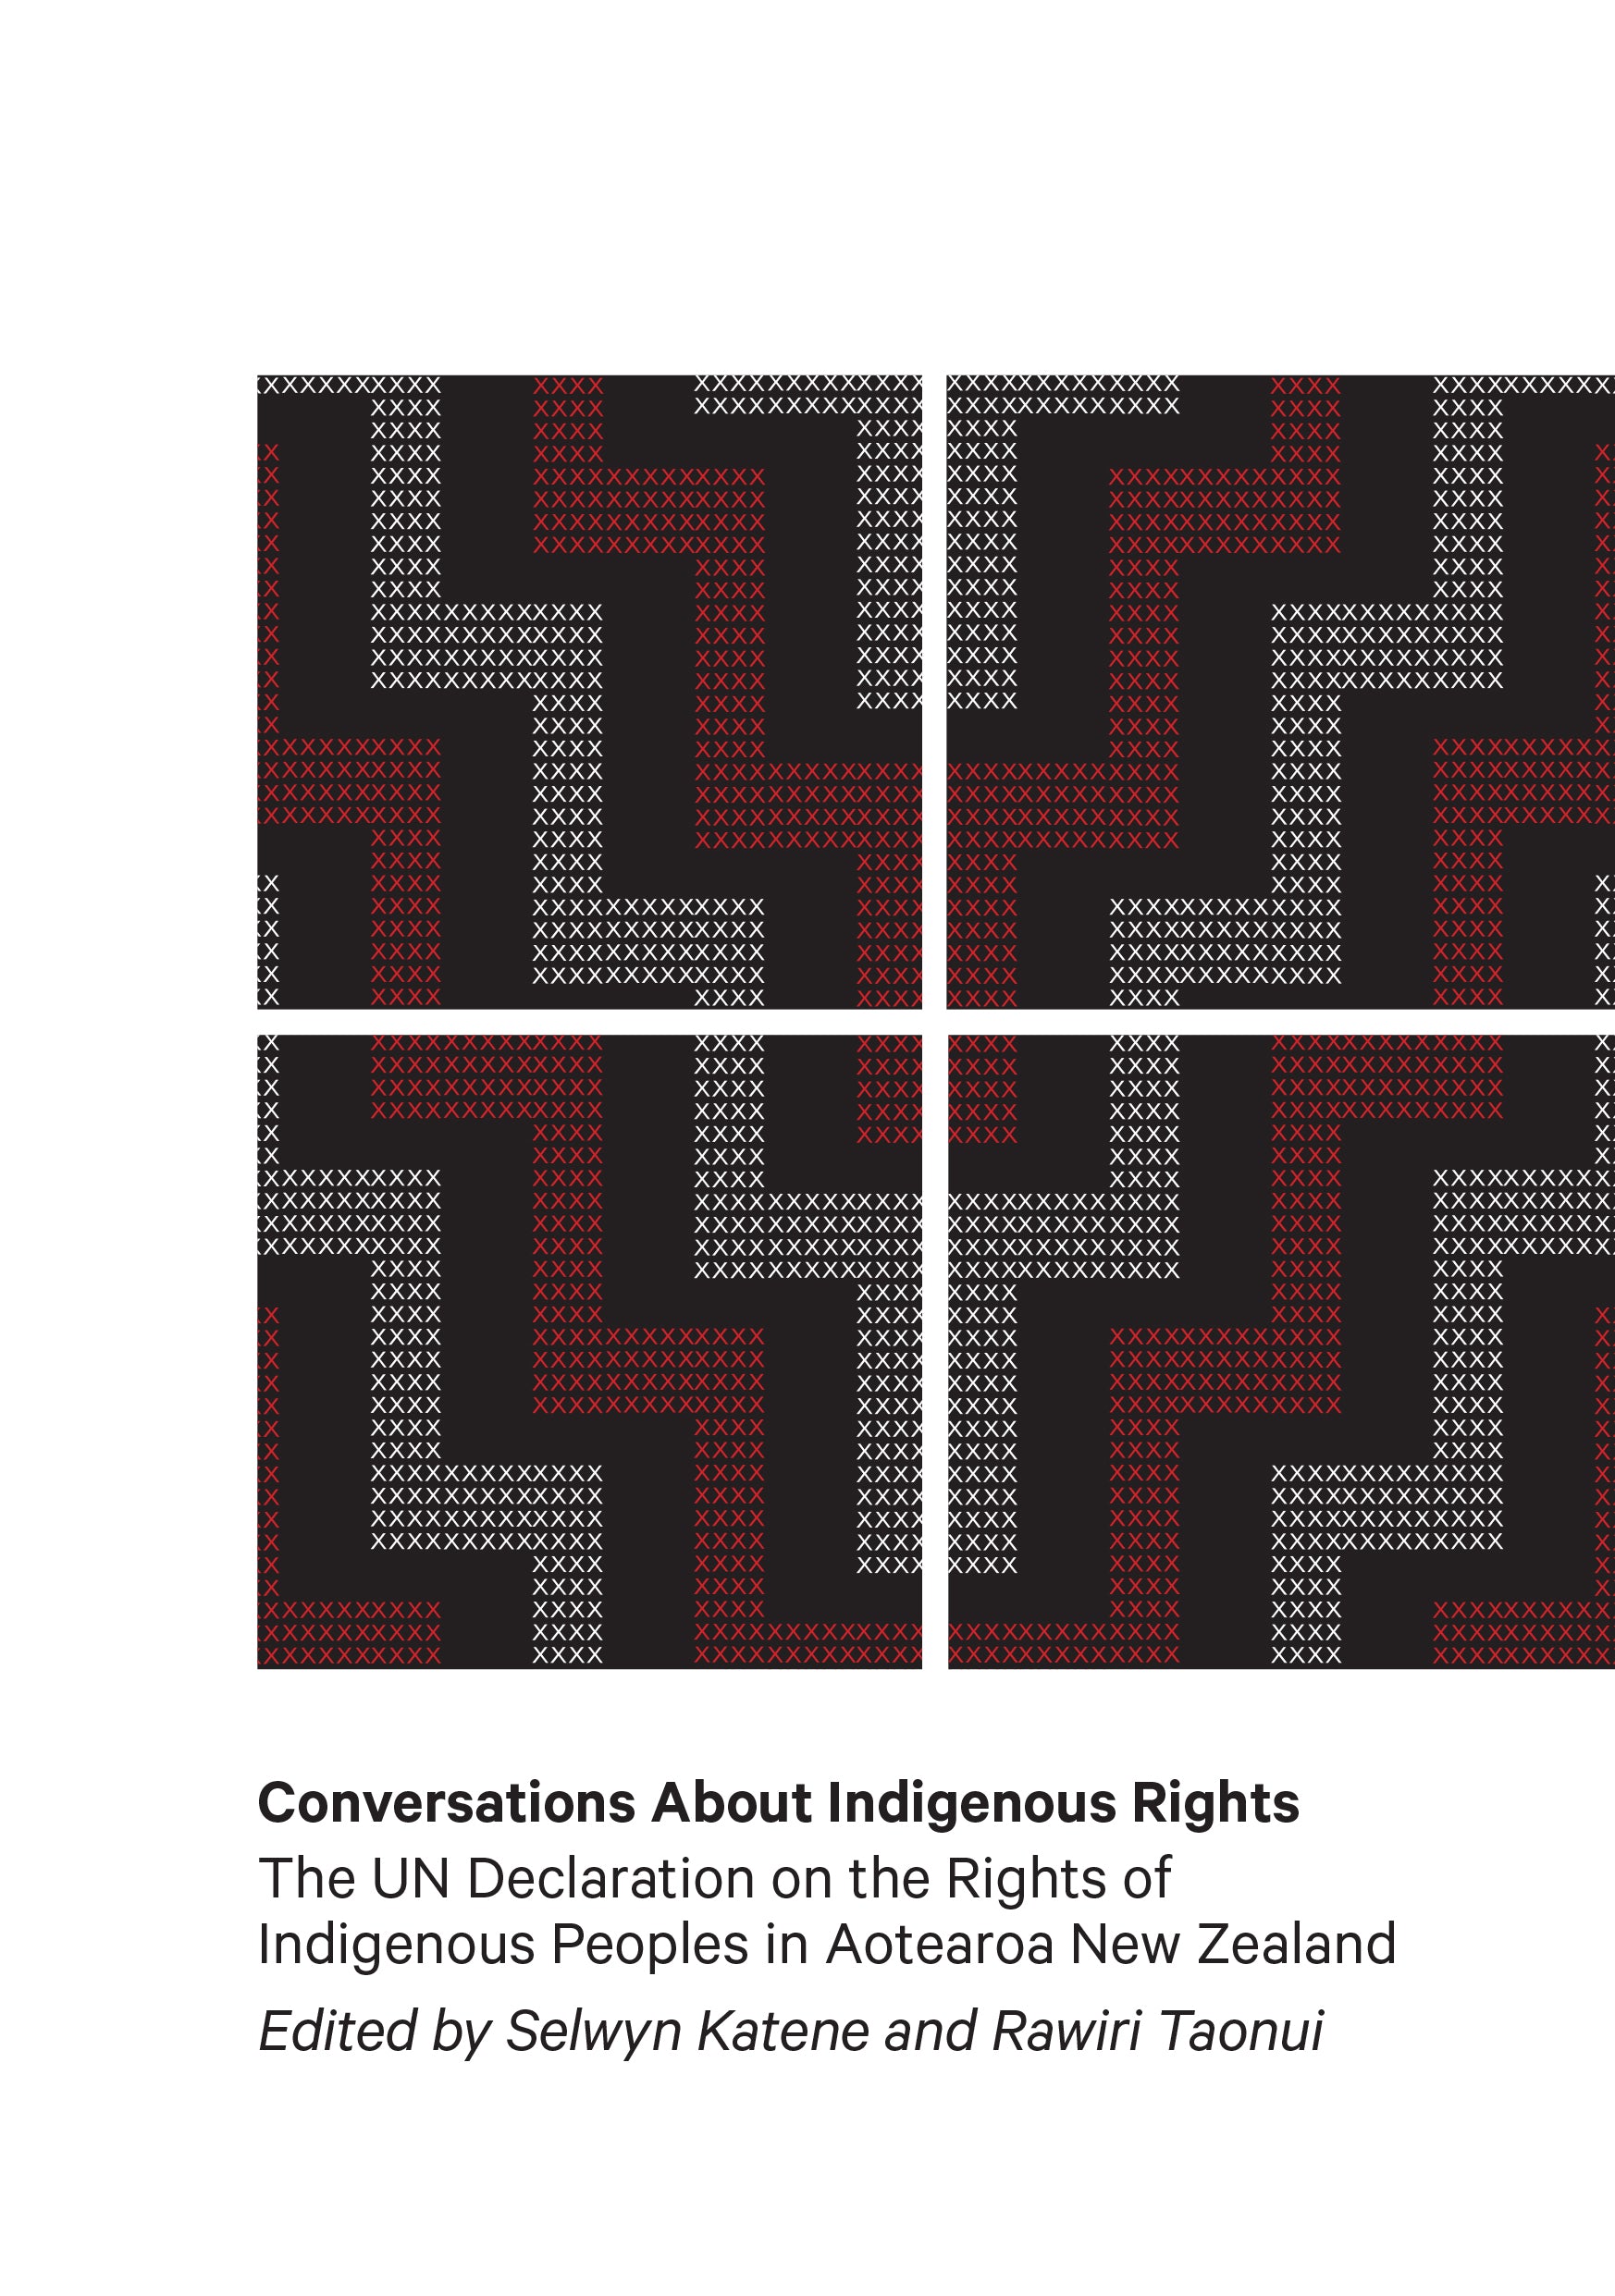 Conversations About Indigenous Rights edited by Selwyn Katene & Rawiri Taonui